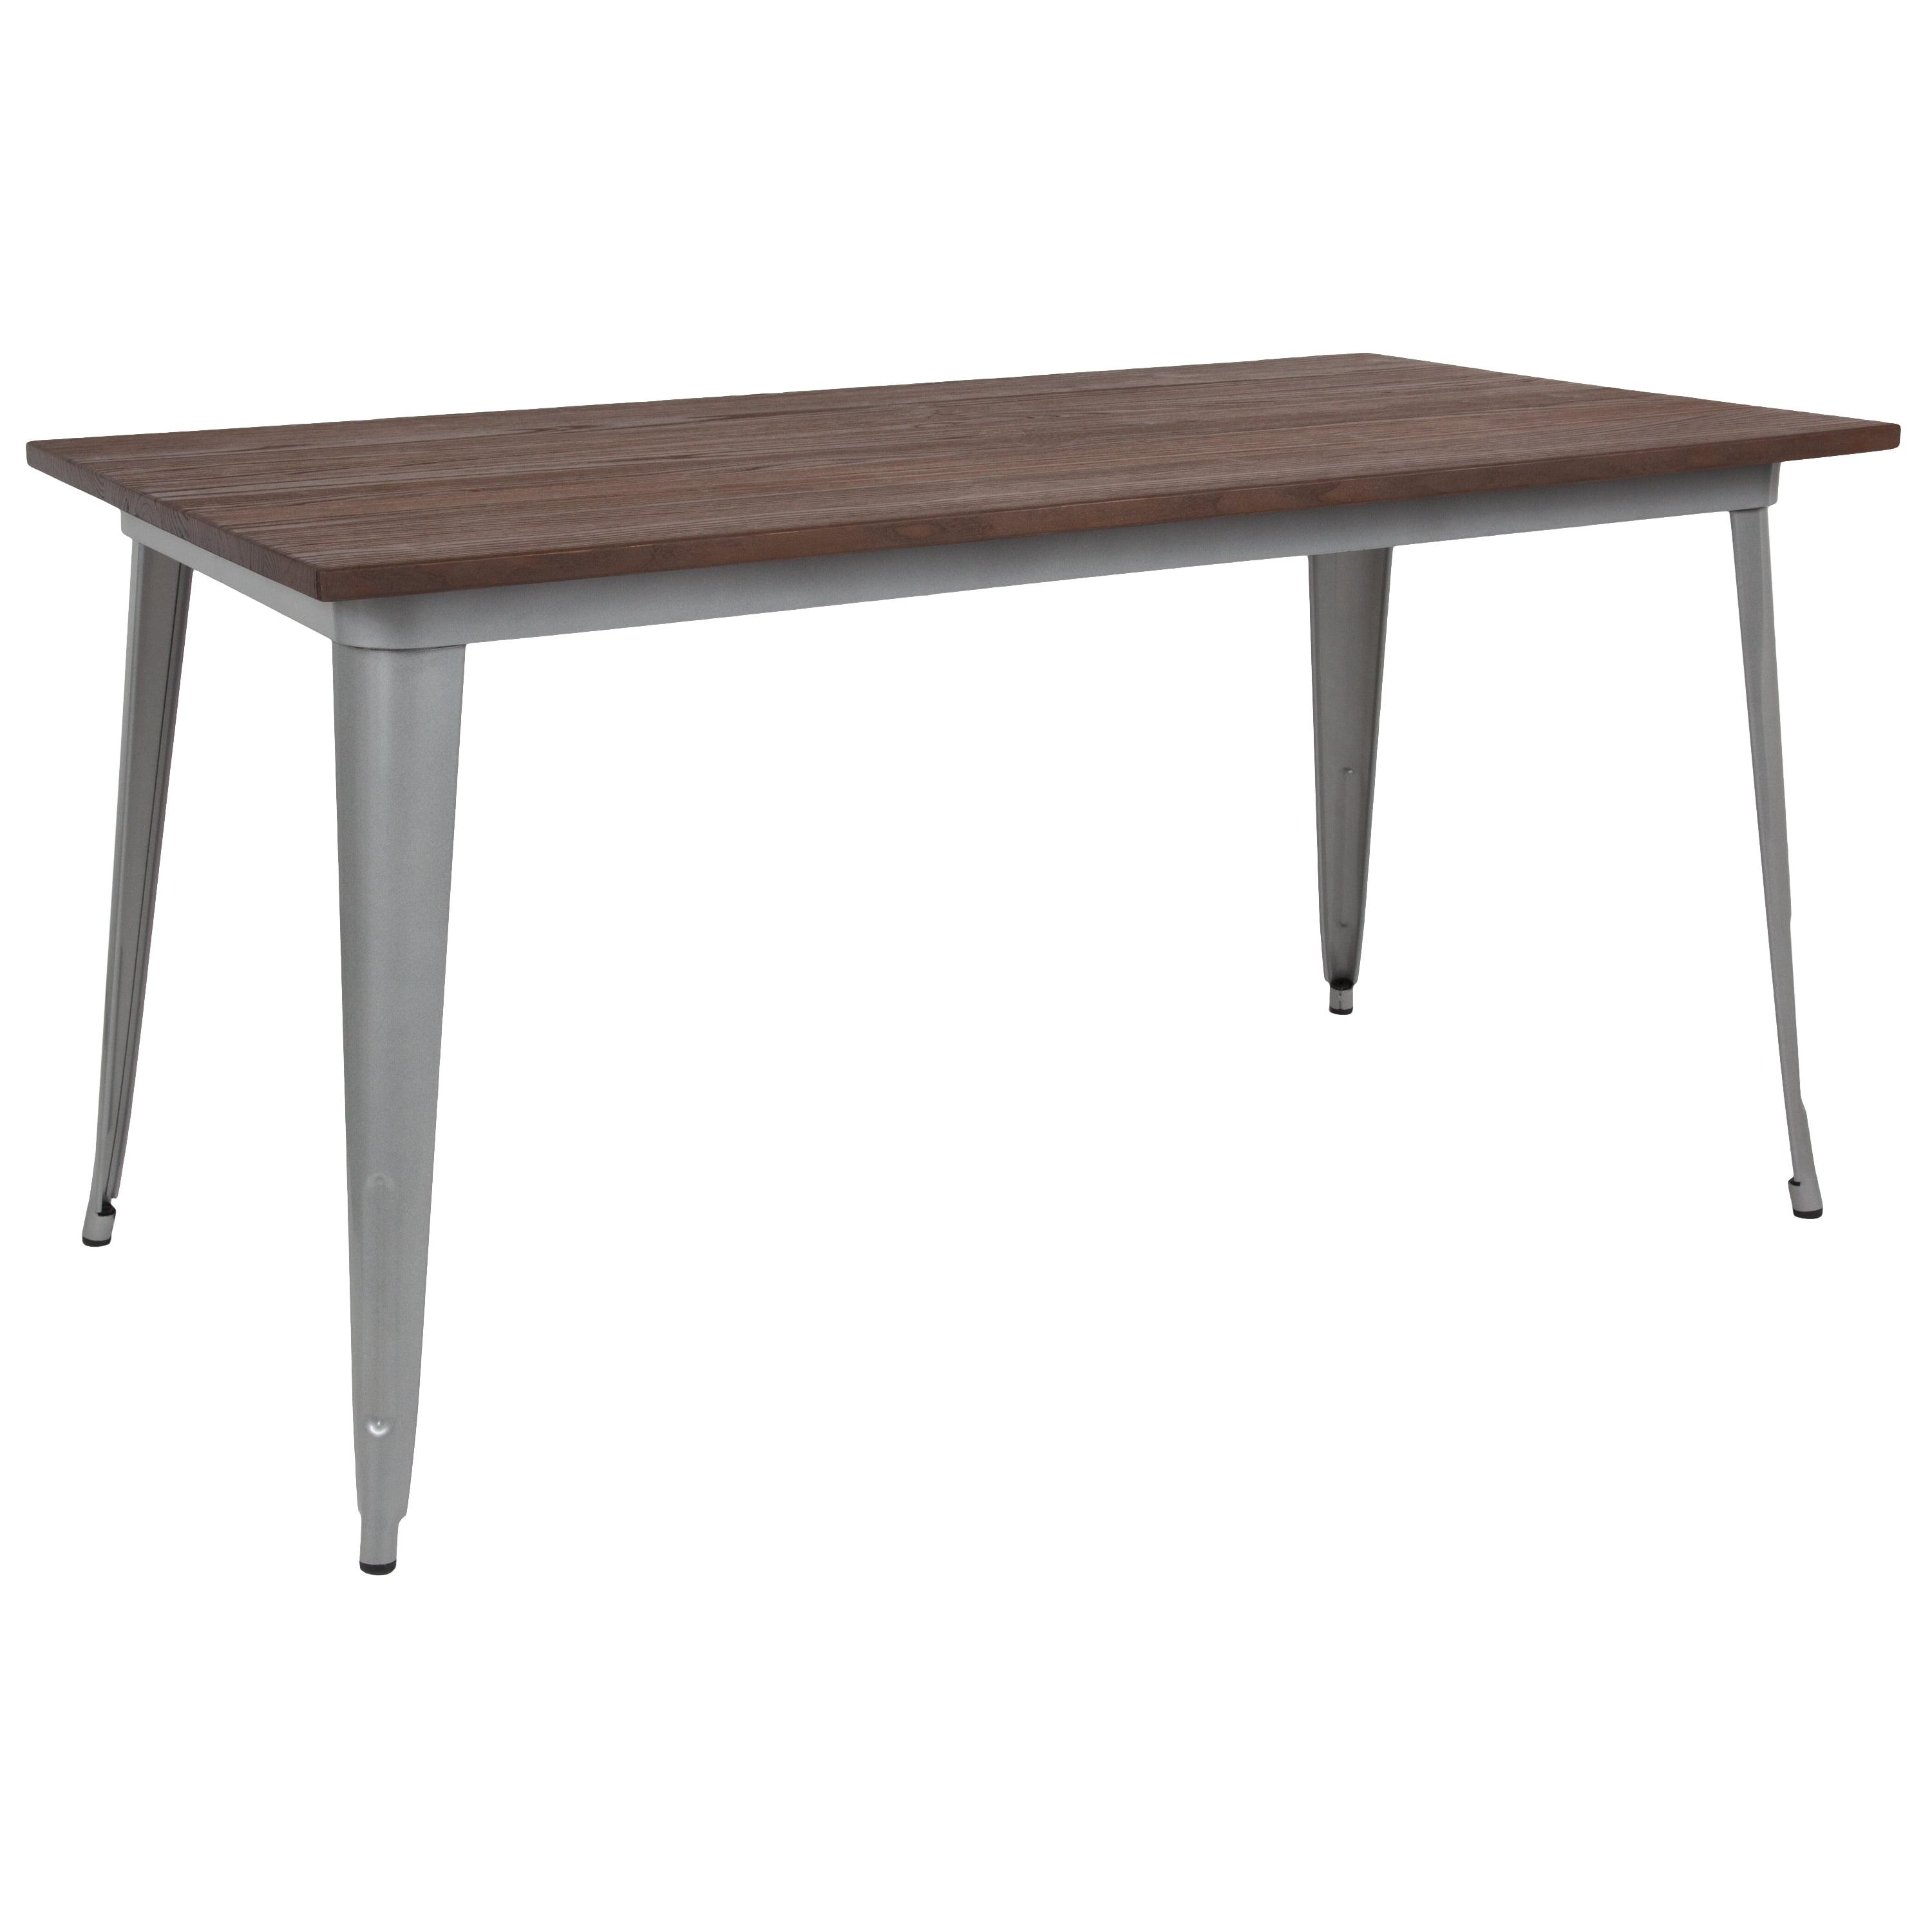 Rustic Elmwood and Galvanized Steel 60" Cafe Dining Table